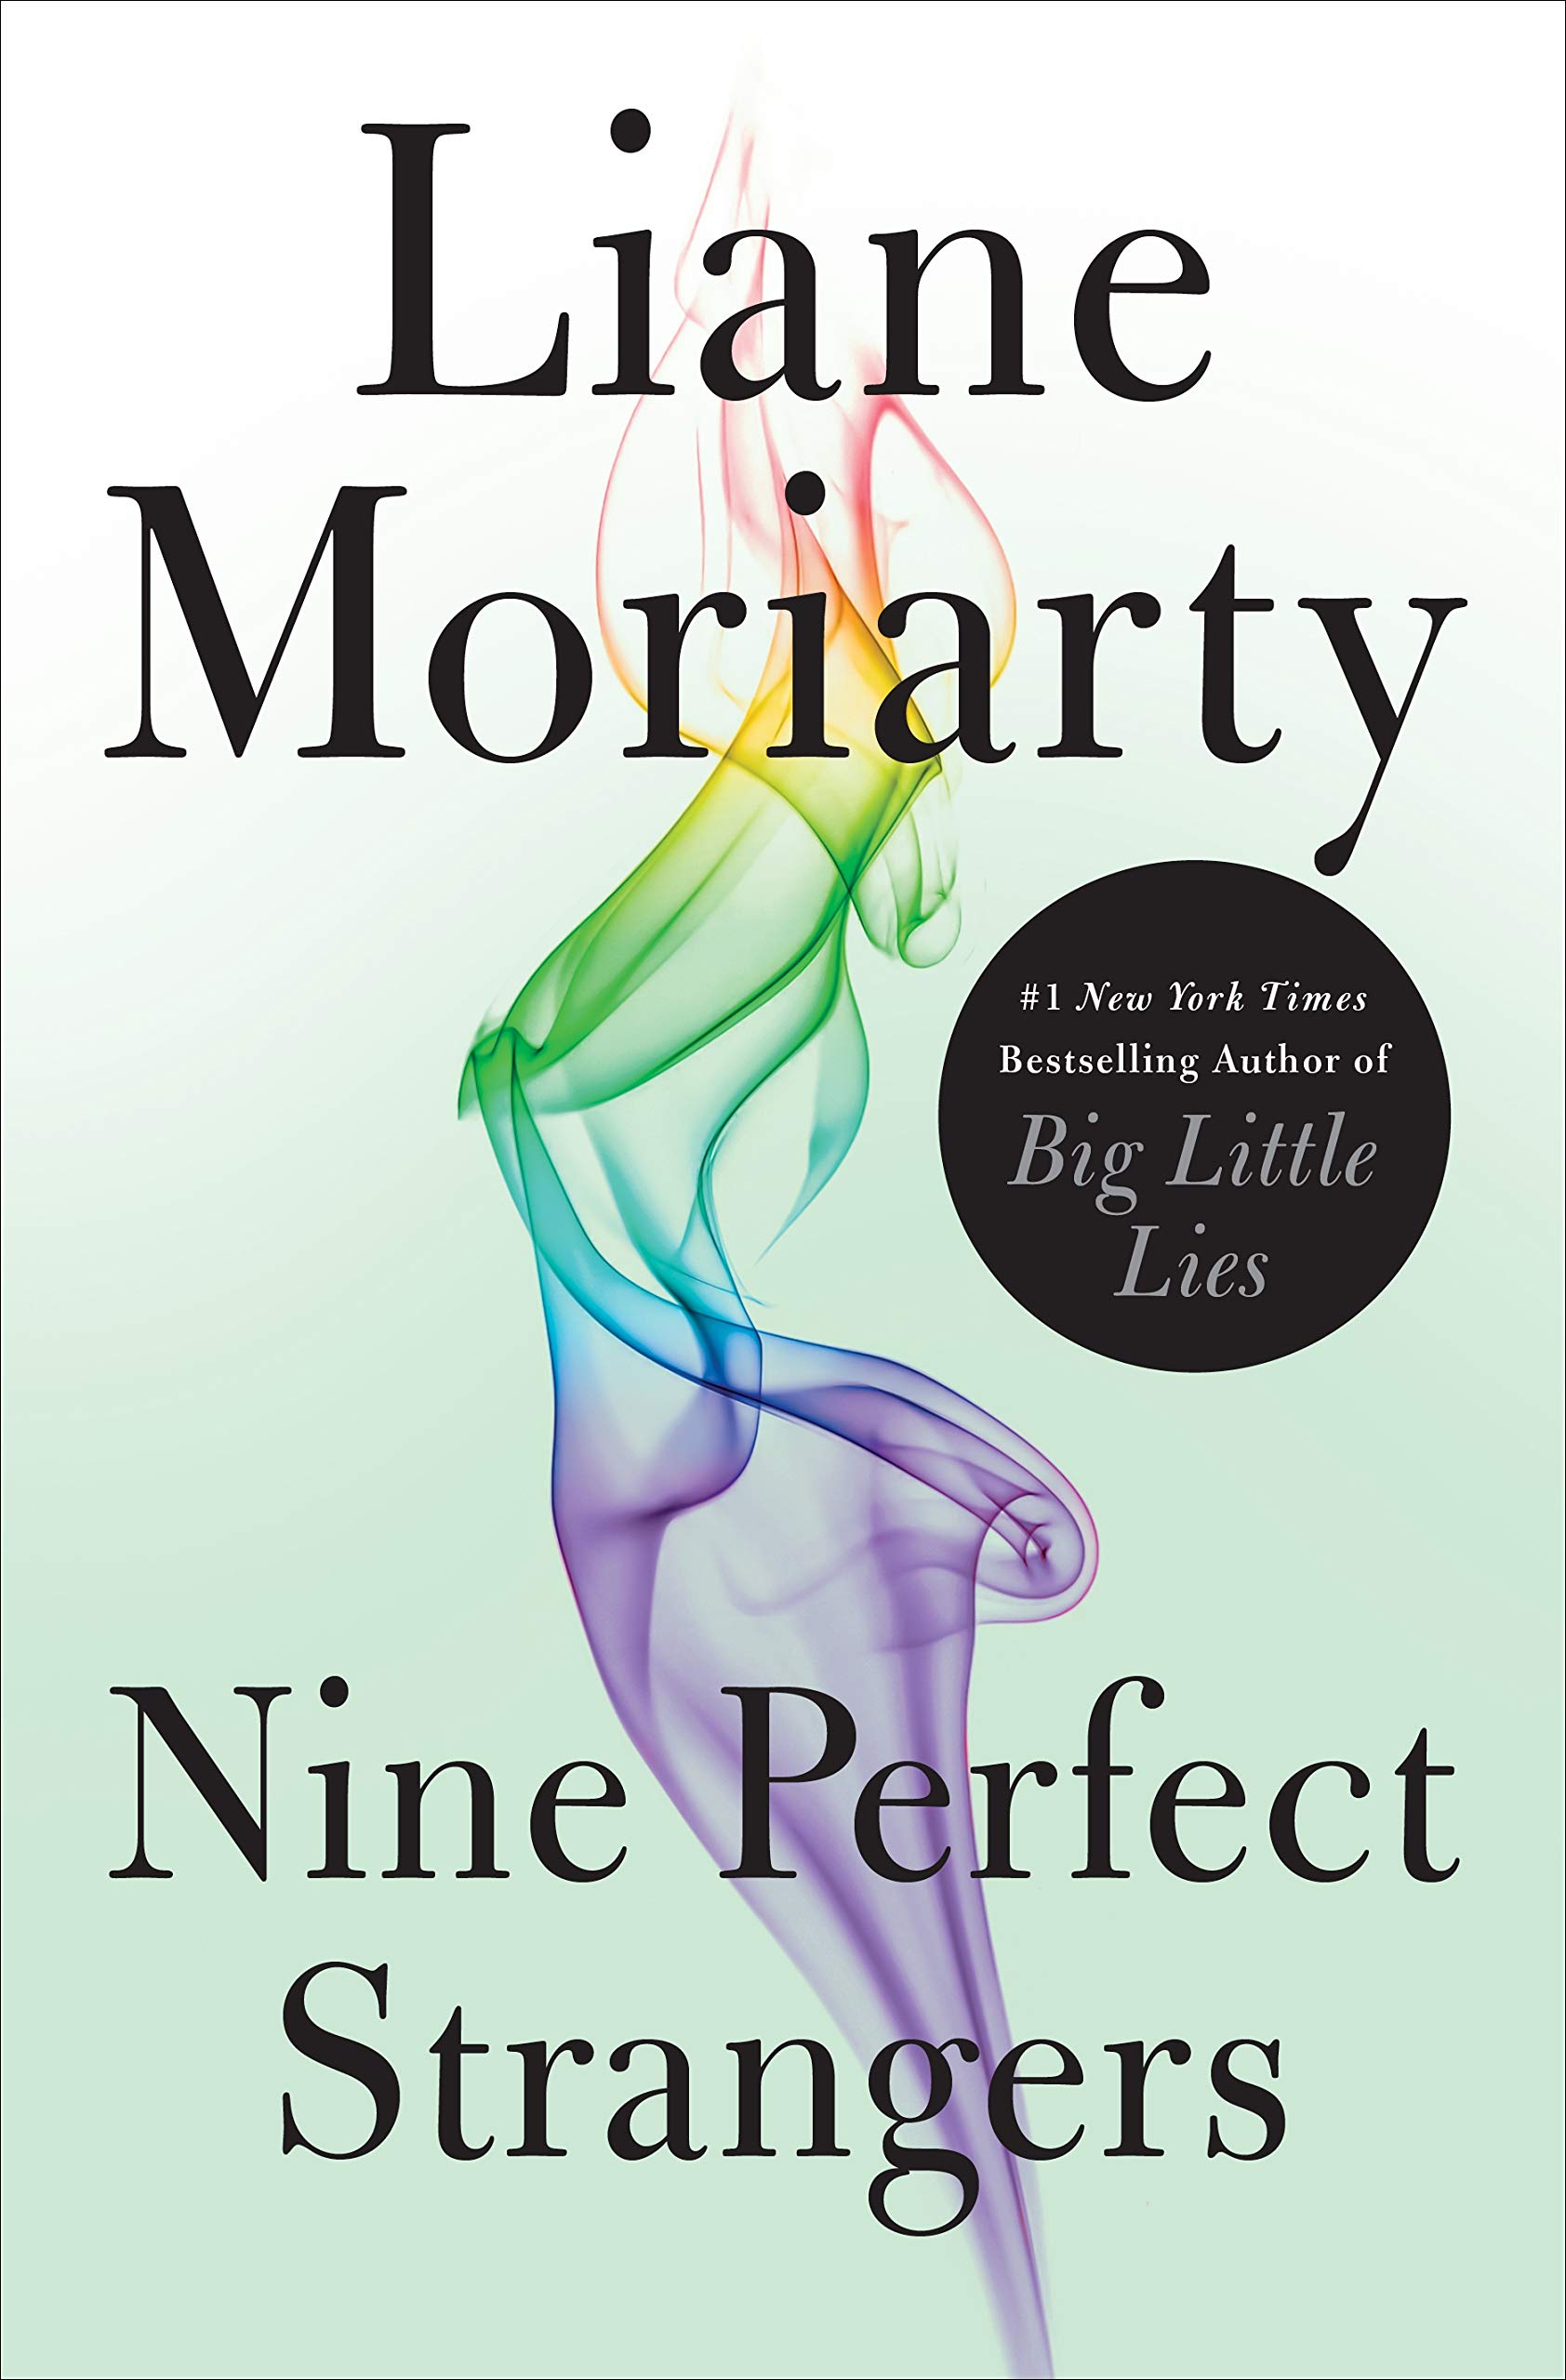 Image for "Nine Perfect Strangers"